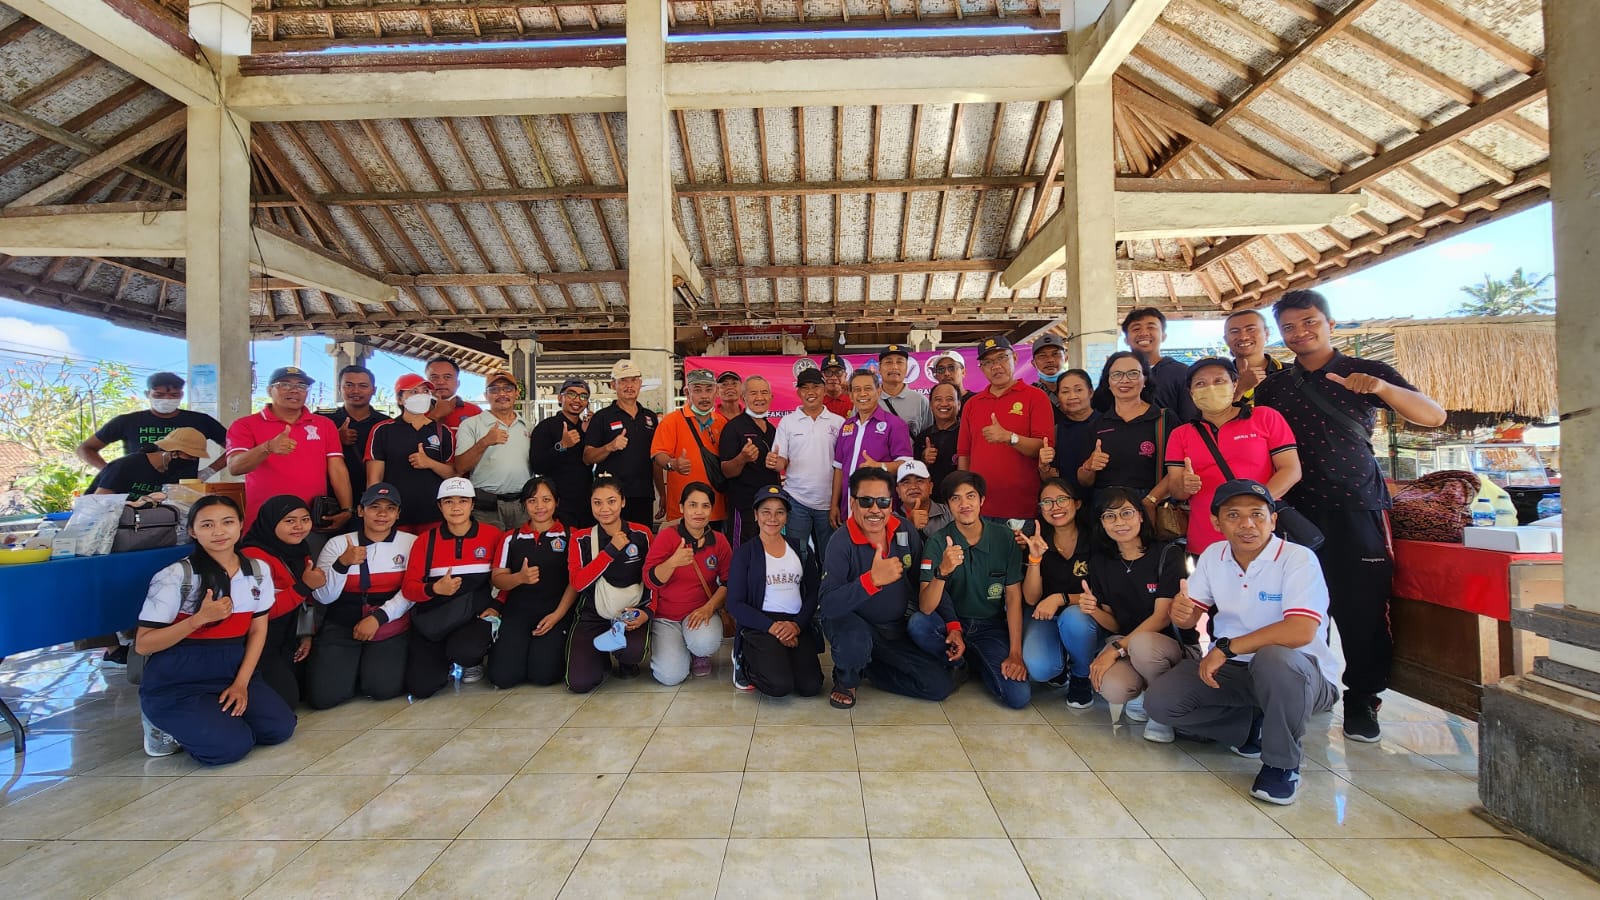 Responding to Rabies, FVM UNUD Holds Community Service with IVMA Bali, the Klungkung Agriculture Service and the Seva Buana Foundation in Nyalian village, Banjarangkan, Klungkung